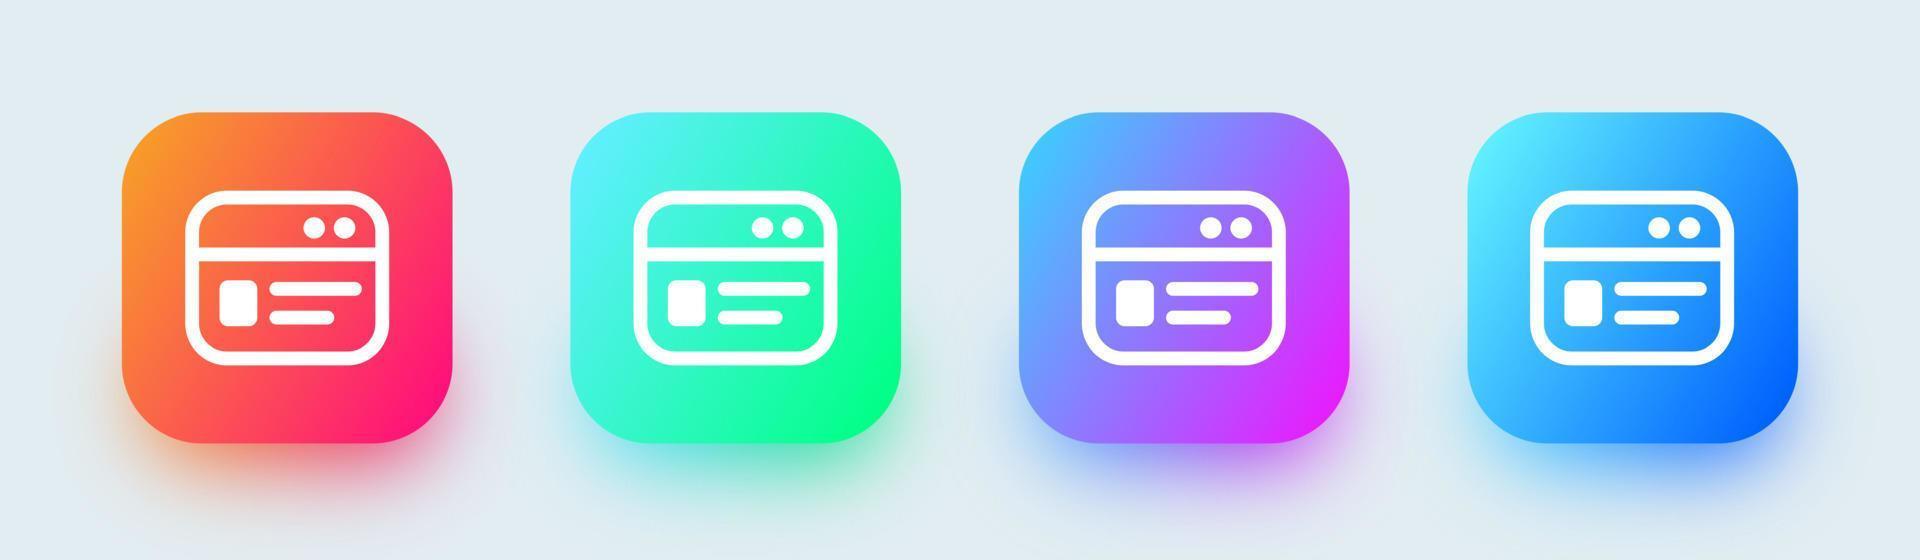 Browser line icon in square gradient colors. Webpage vector symbol for website interface.